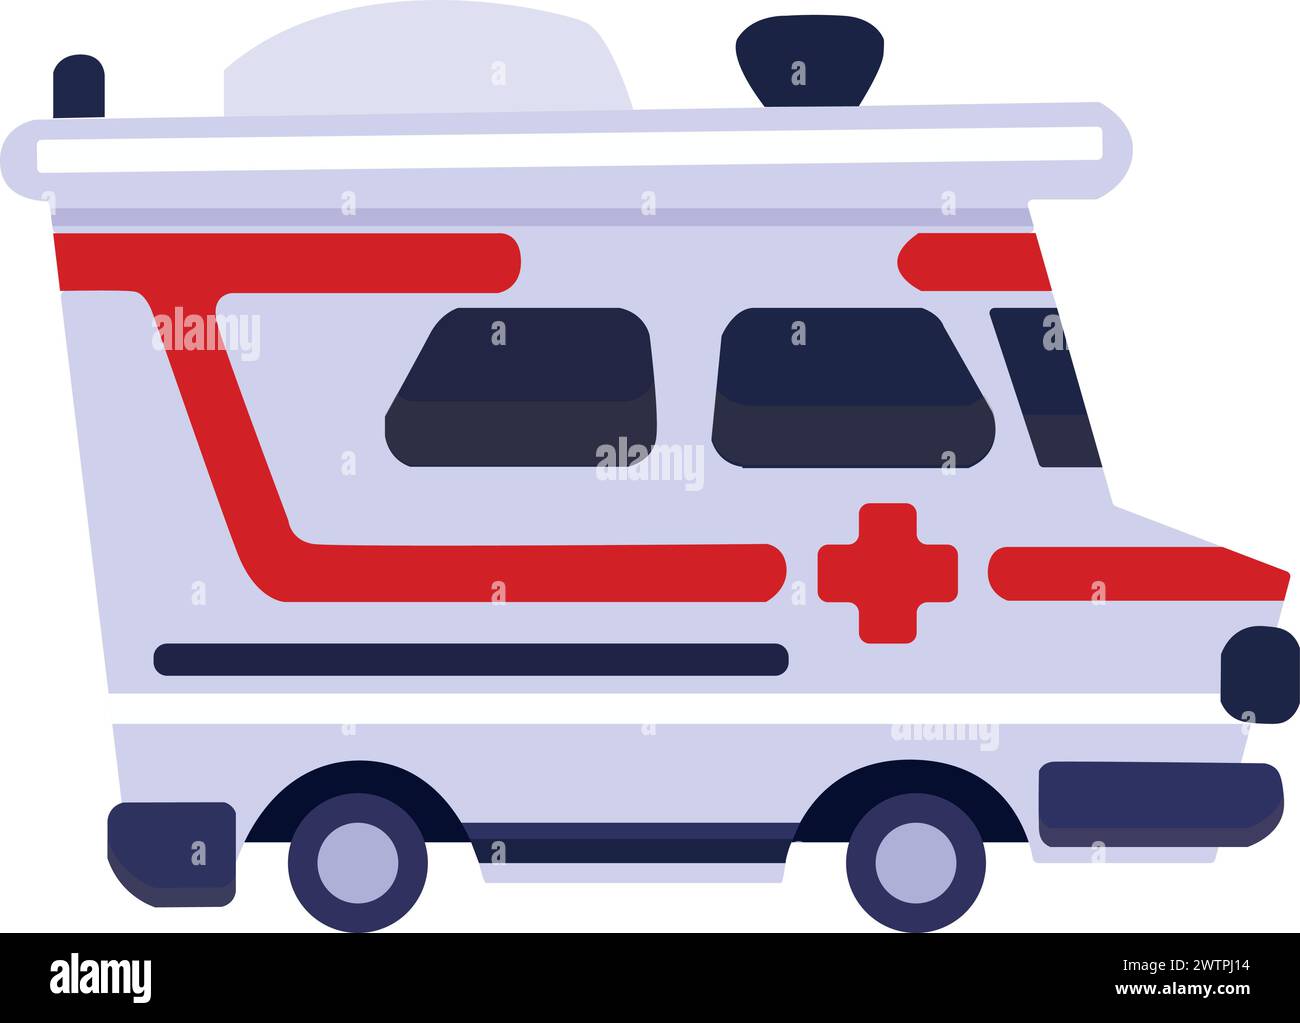 Red and White Ambulance Car Vector Stock Vector